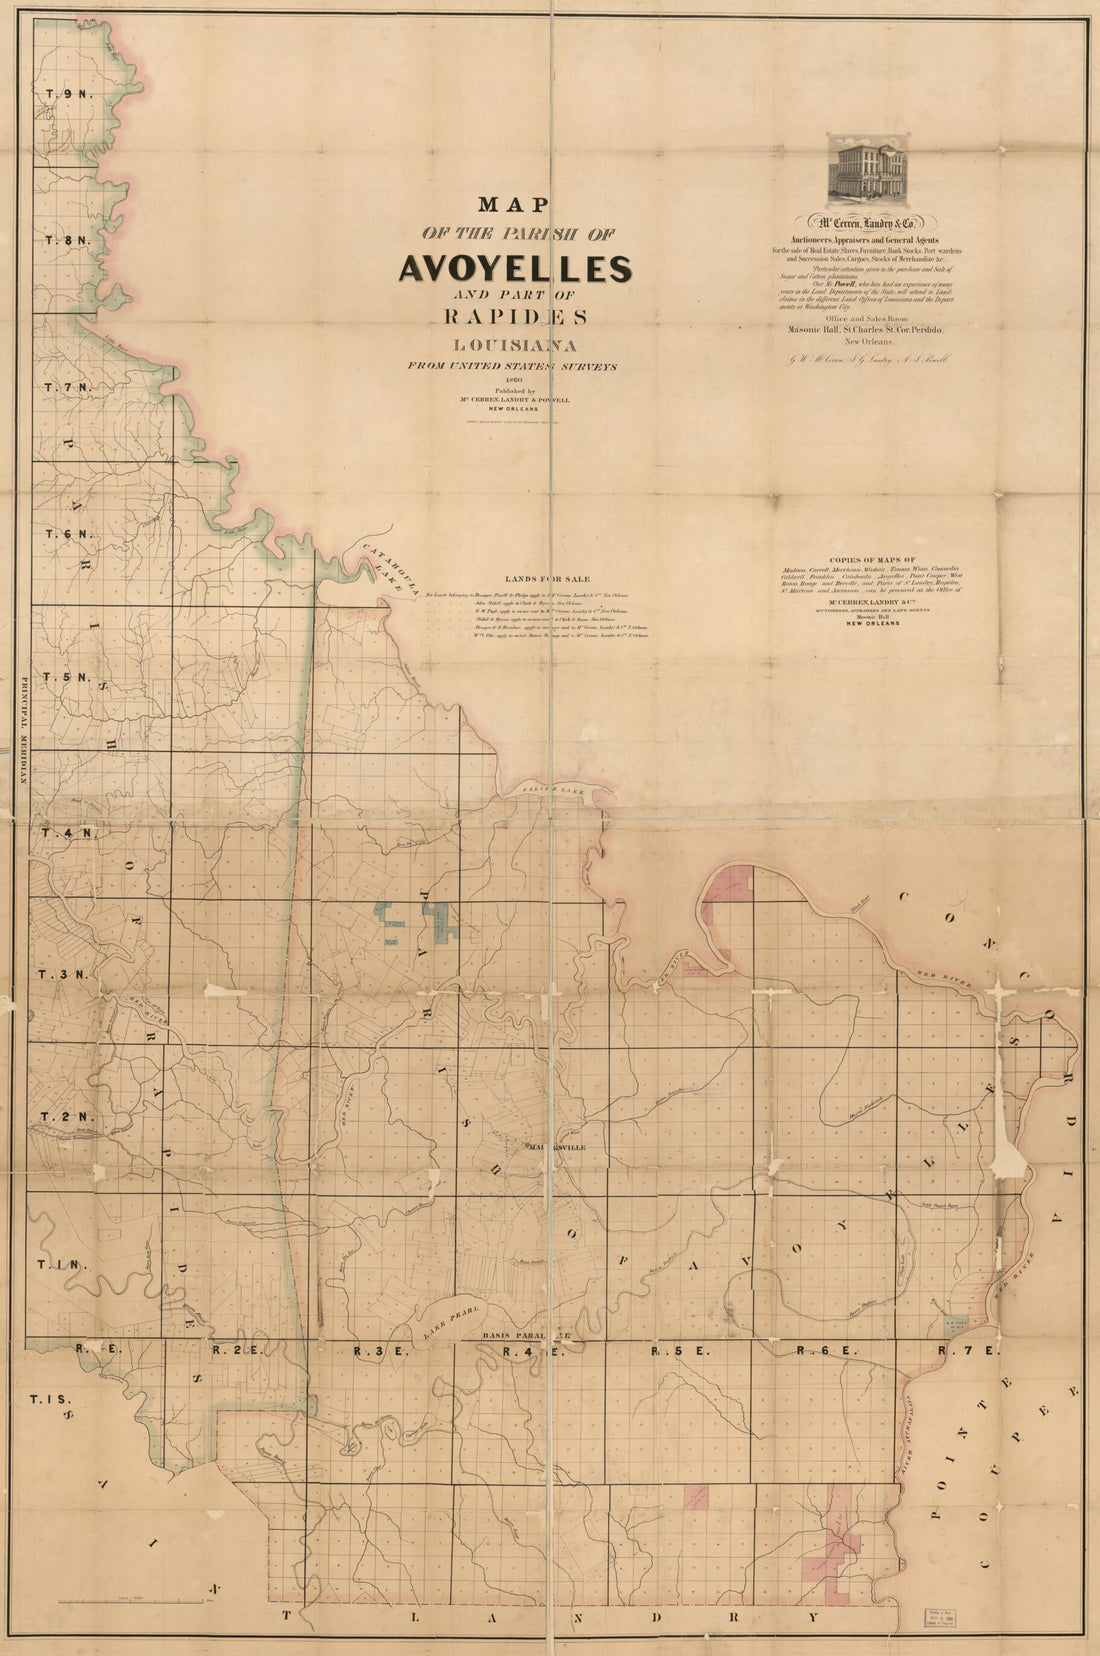 This old map of Map of the Parish of Avoyelles and Part of Rapides, Louisiana : from the United States Survey from 1860 was created by Landry &amp; Powell McCerren in 1860